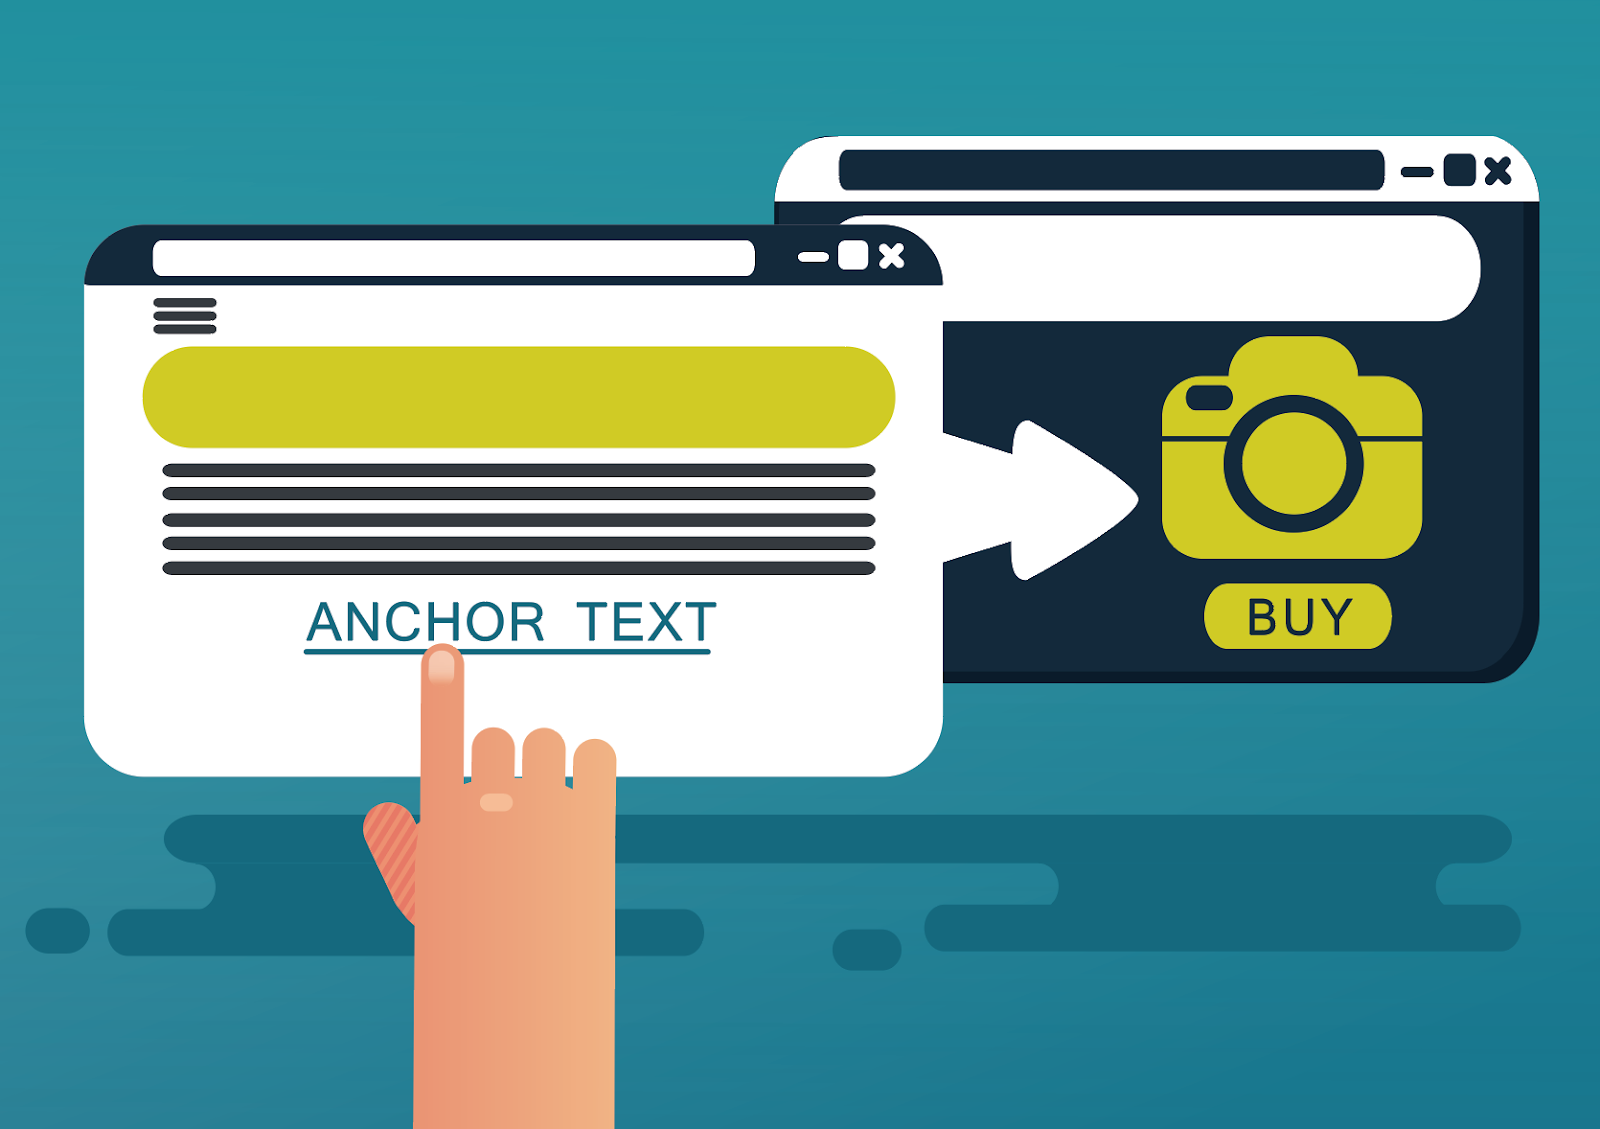 clicking on anchor text often send you to offer pages on other sites